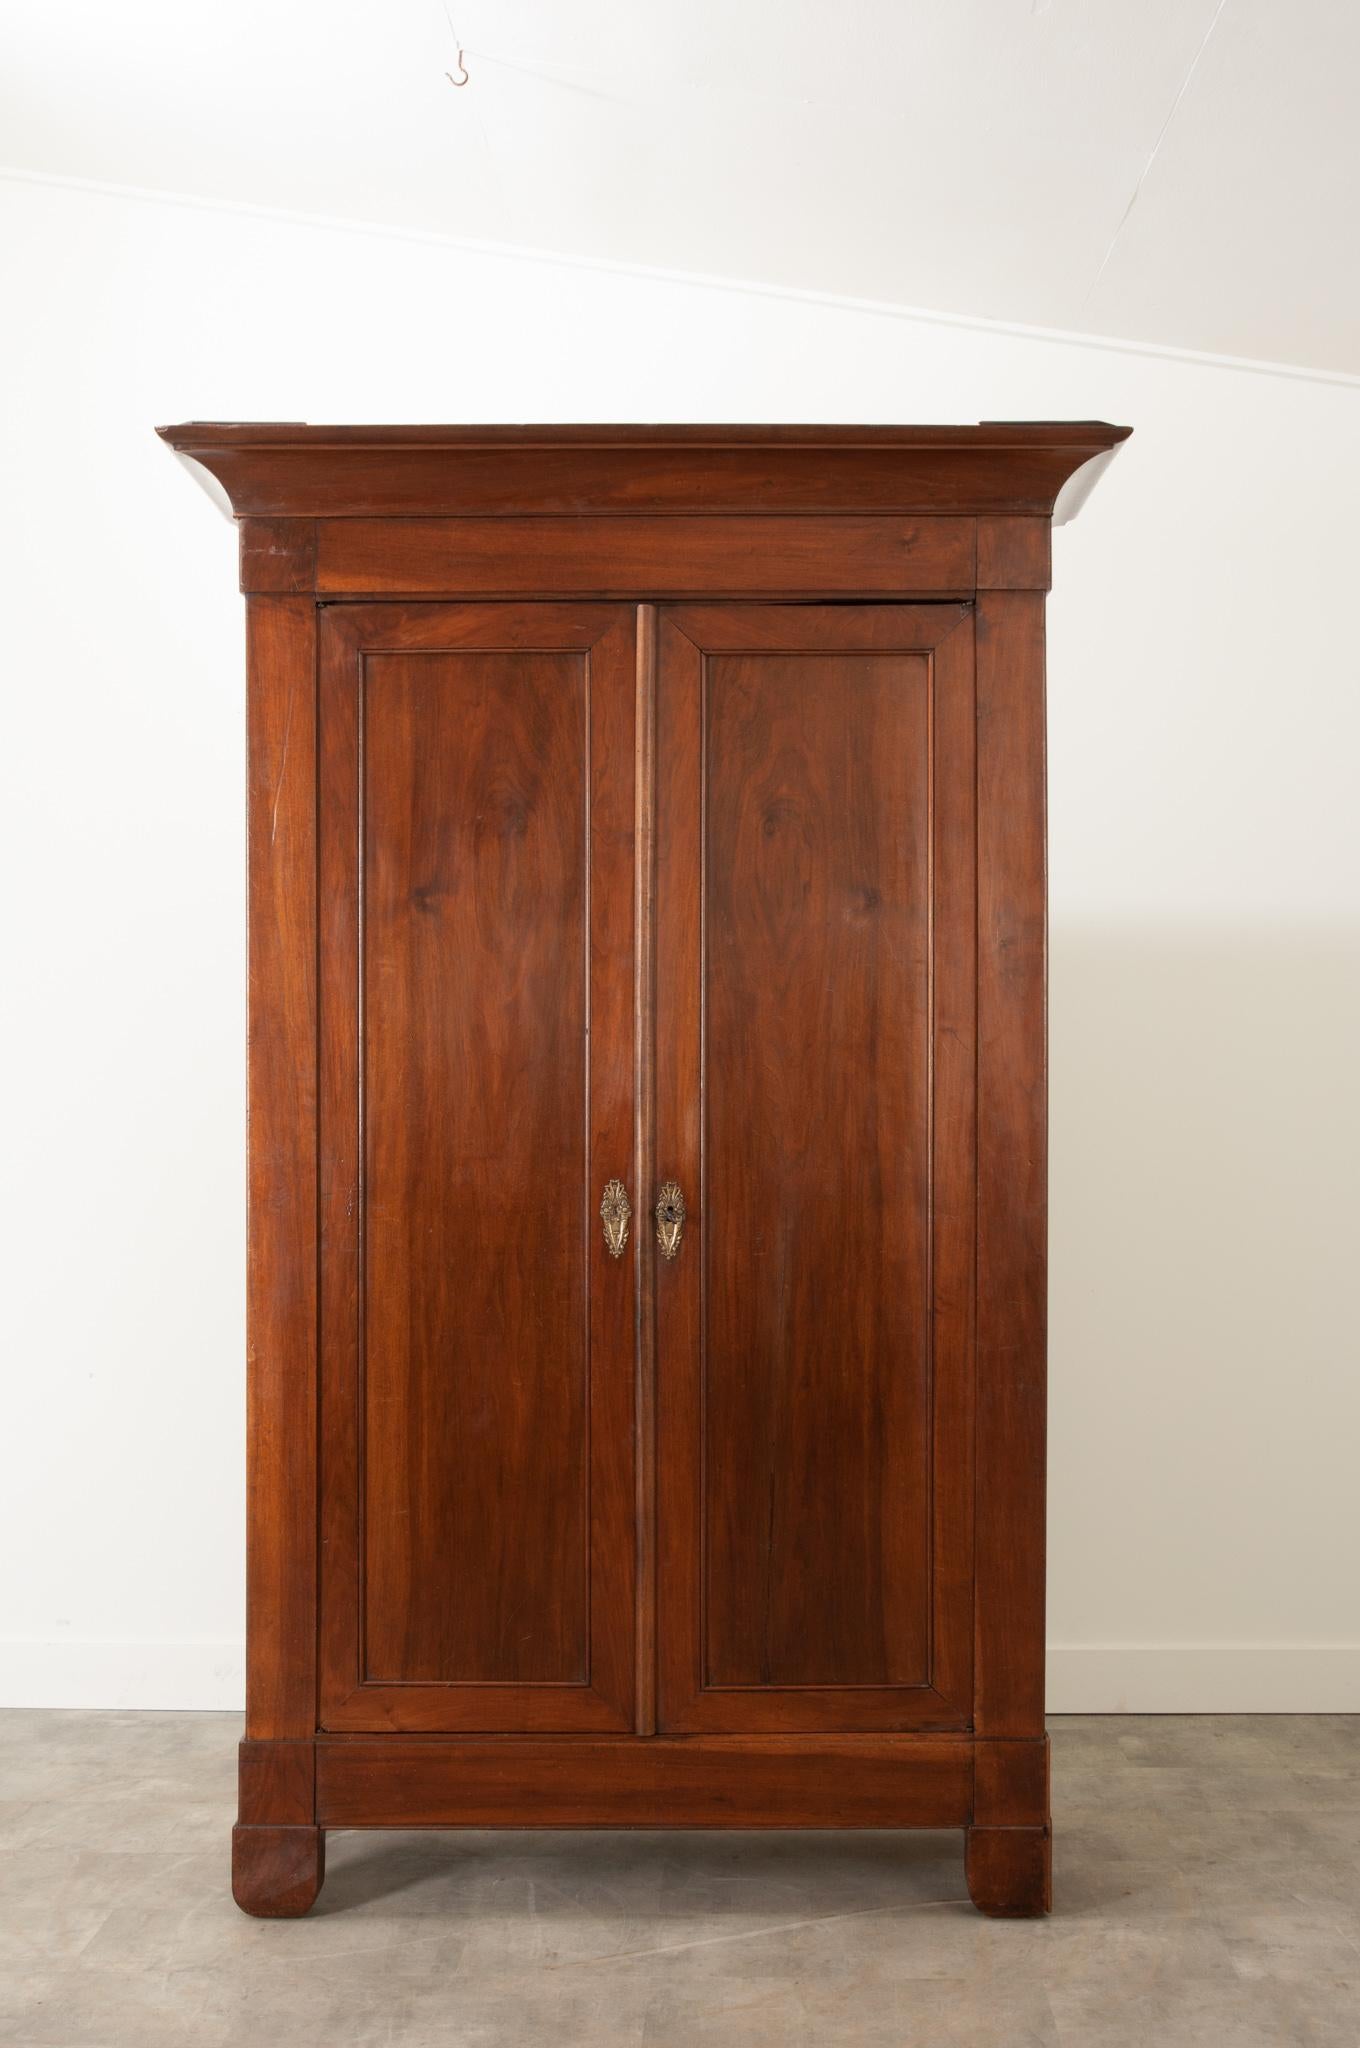 This handsome Empire style walnut armoire features a carved cornice over a pair of paneled doors mounted with stylized brass floral motif escutcheons. Recently polished with French wax paste to revive the rich tone and patina of the wood. A single